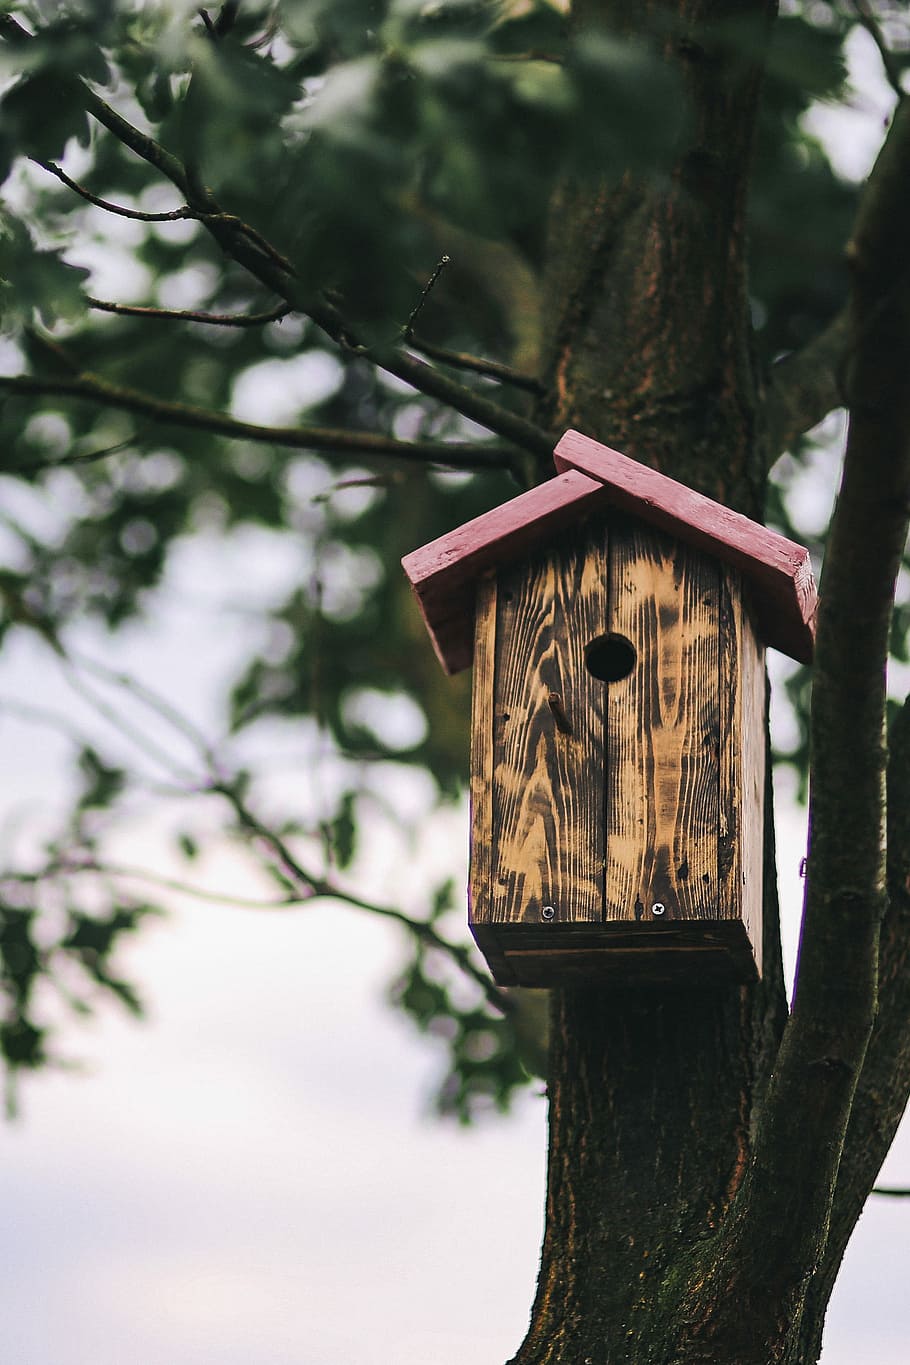 Birdhouse on a Tree, box, wooden, animal Nest, nature, wood - Material